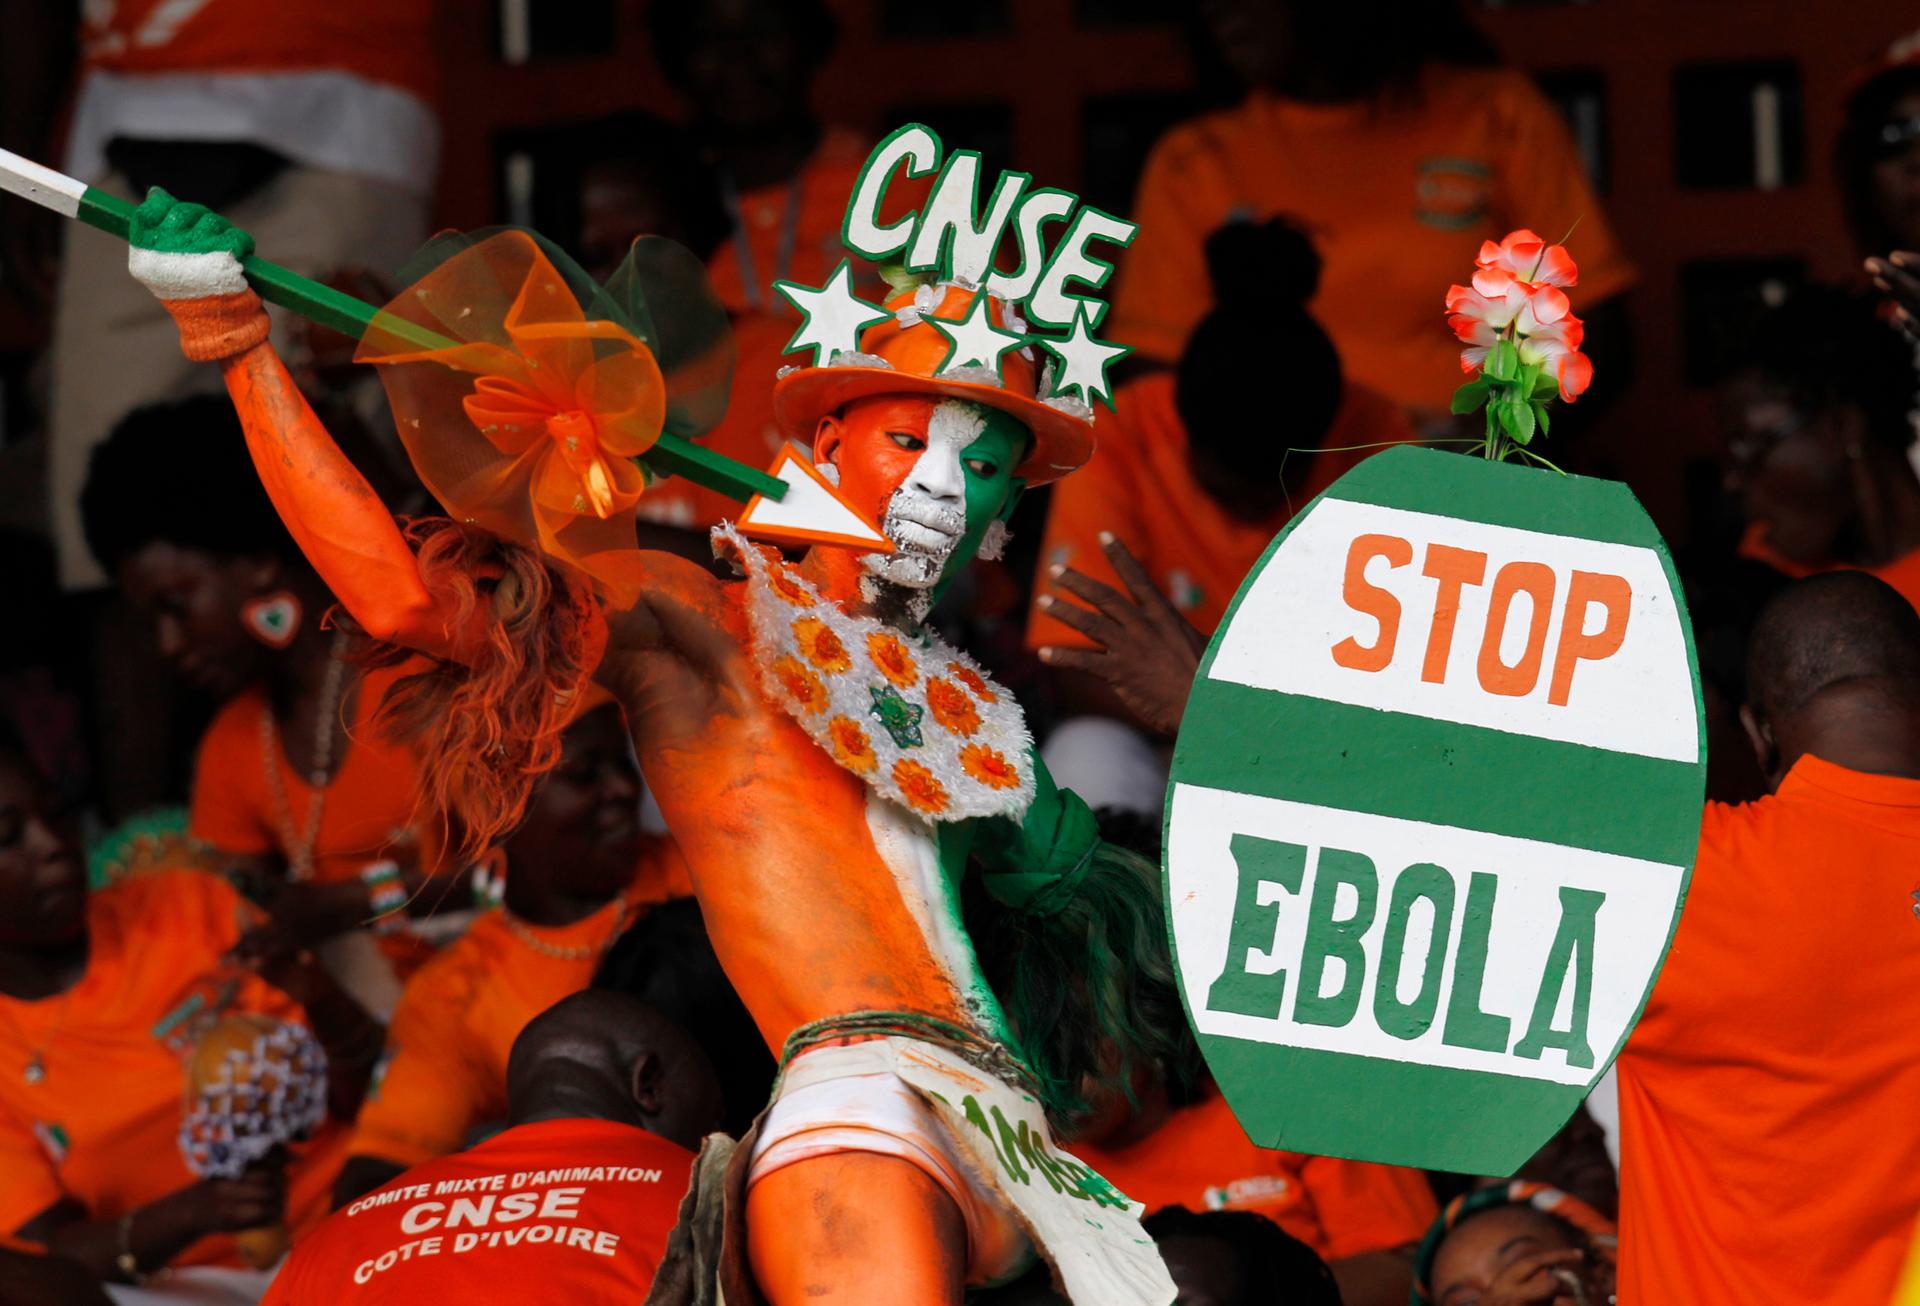 A fan of the Ivory Coast holds a sign with a message against Ebola during a 2015 African Nations Cup qualifier between Ivory Coast and Sierra Leone in Abidjan, the Ivorian capital.